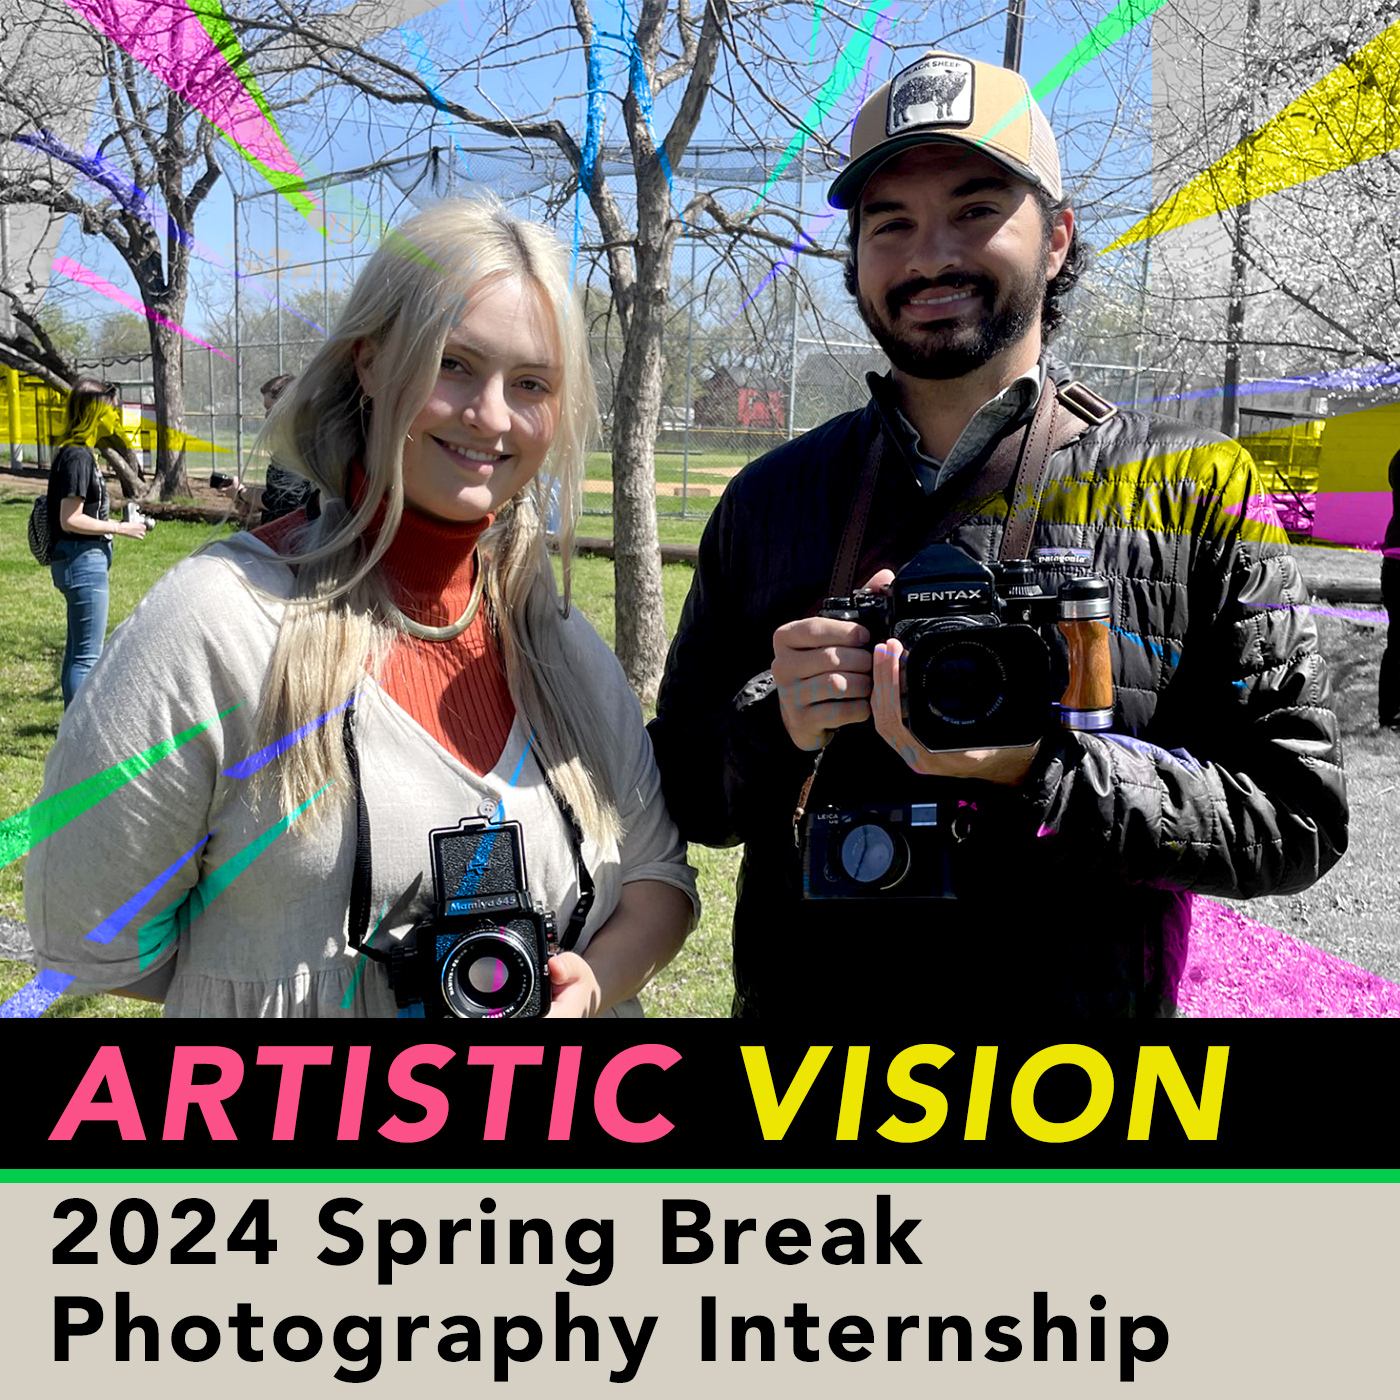 A young man and woman smile with digital cameras in hand outside of a baseball diamond. Yellow and purple streaks add flair to the image. Text reads, “Artistic Vision, 2024 Spring Break Photography Internship.”